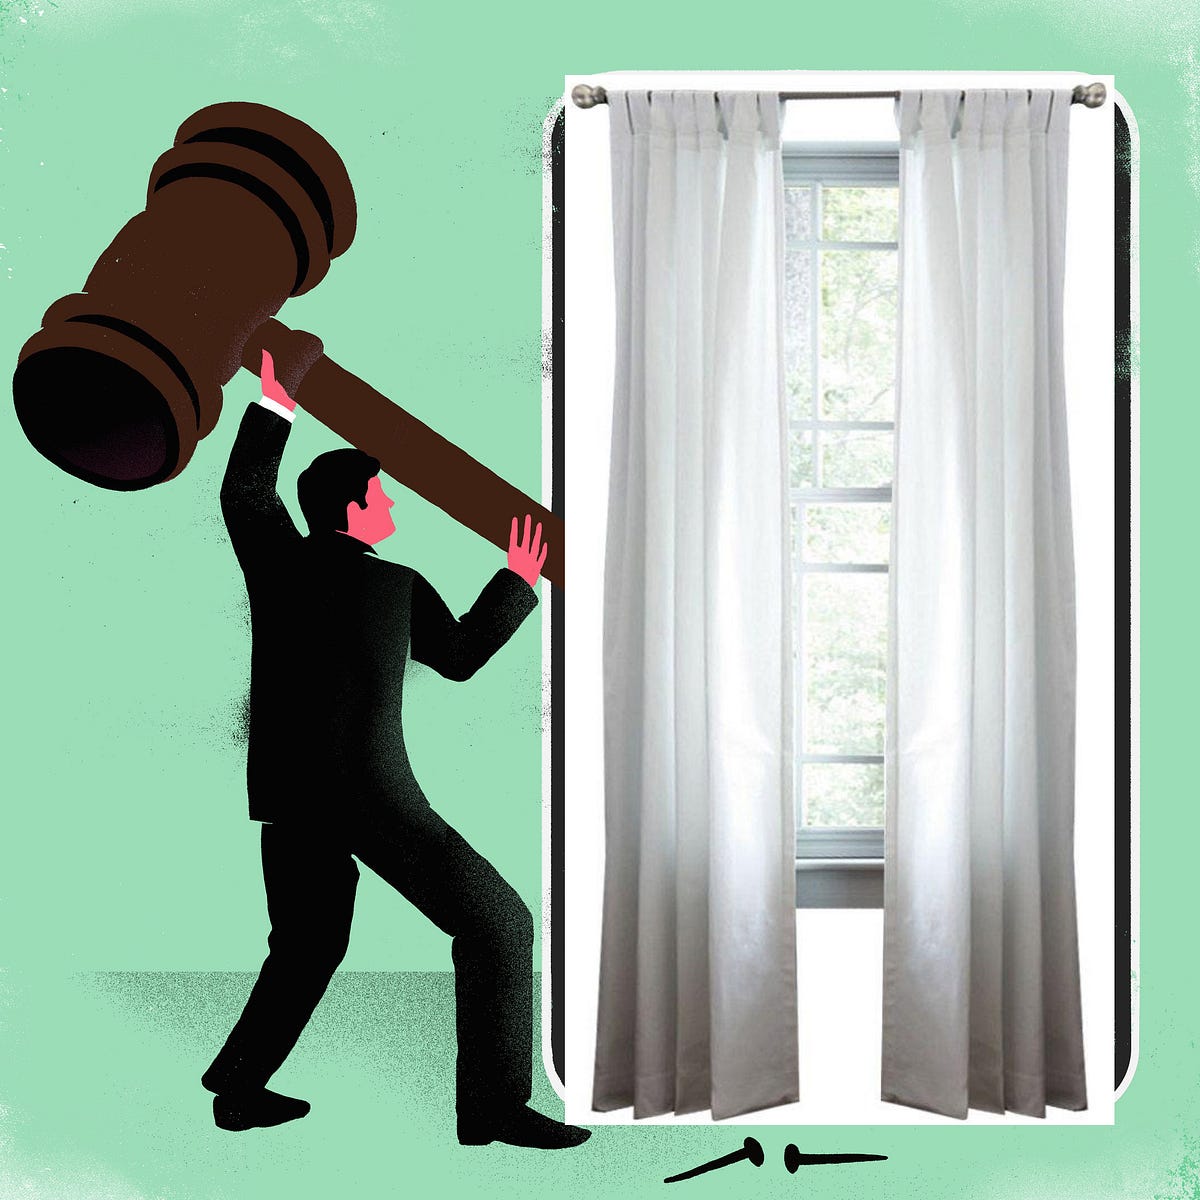 When Curtains Block Justice